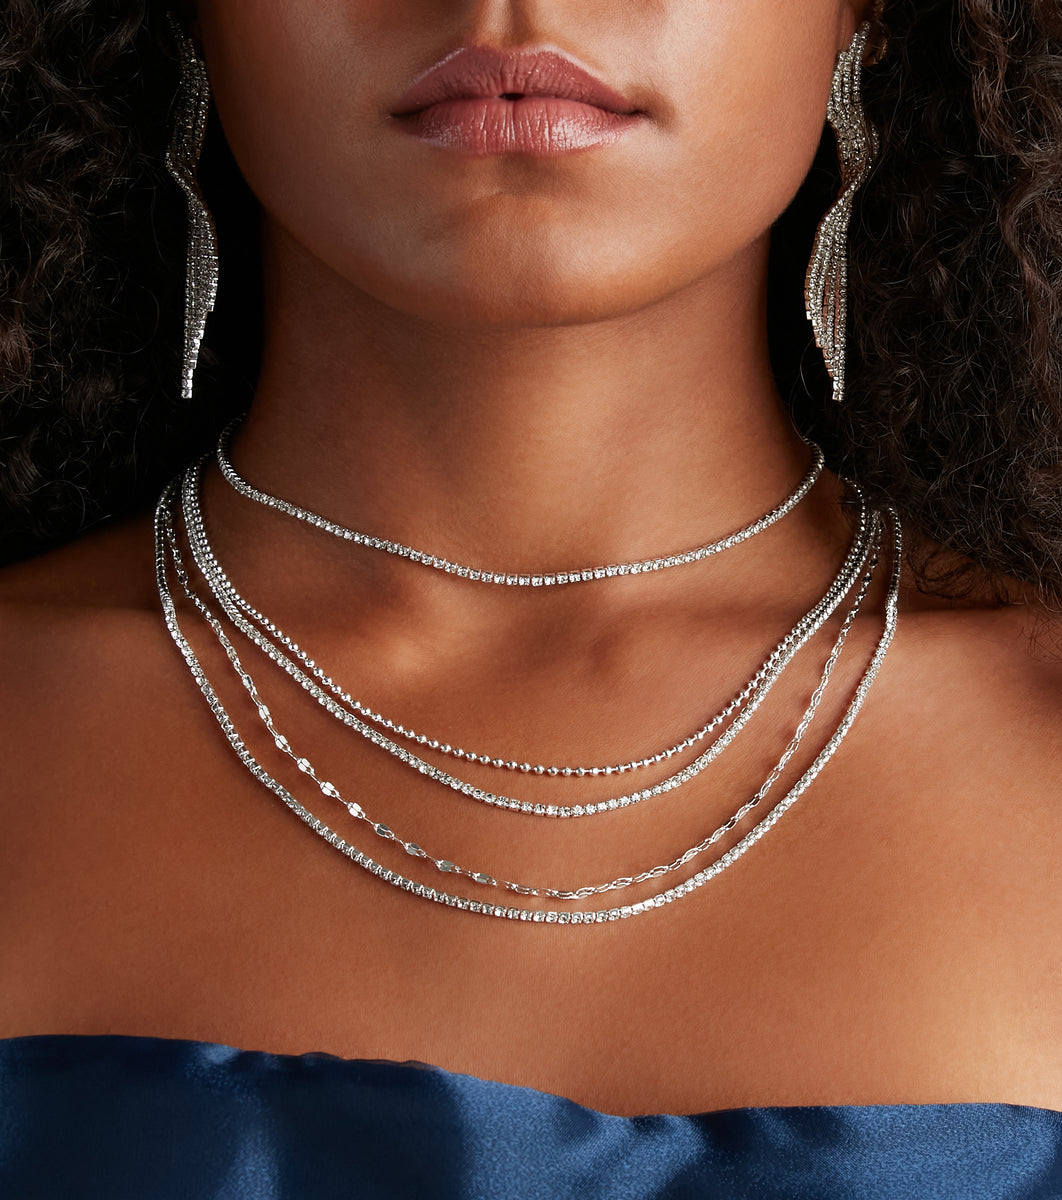 To Layered Be Necklace | Rhinestone Meant Set Windsor